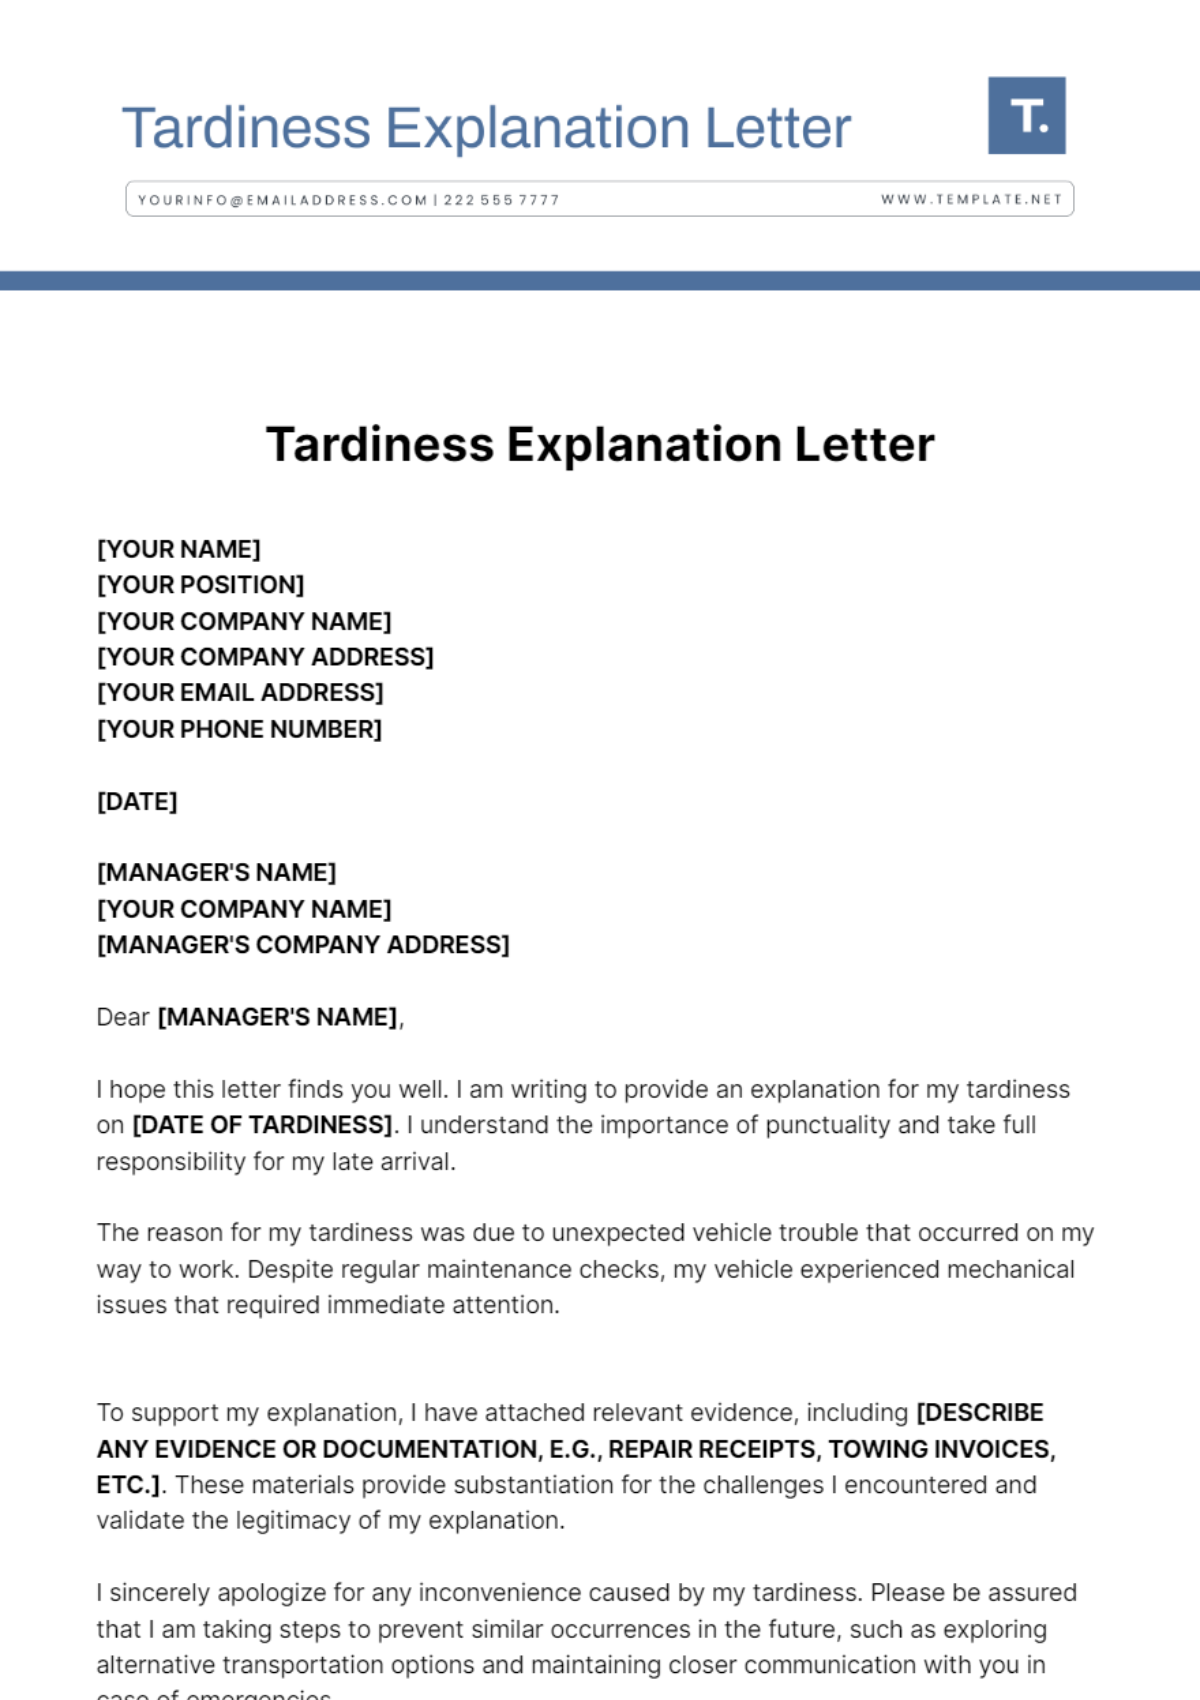 Tardiness Explanation Letter Template